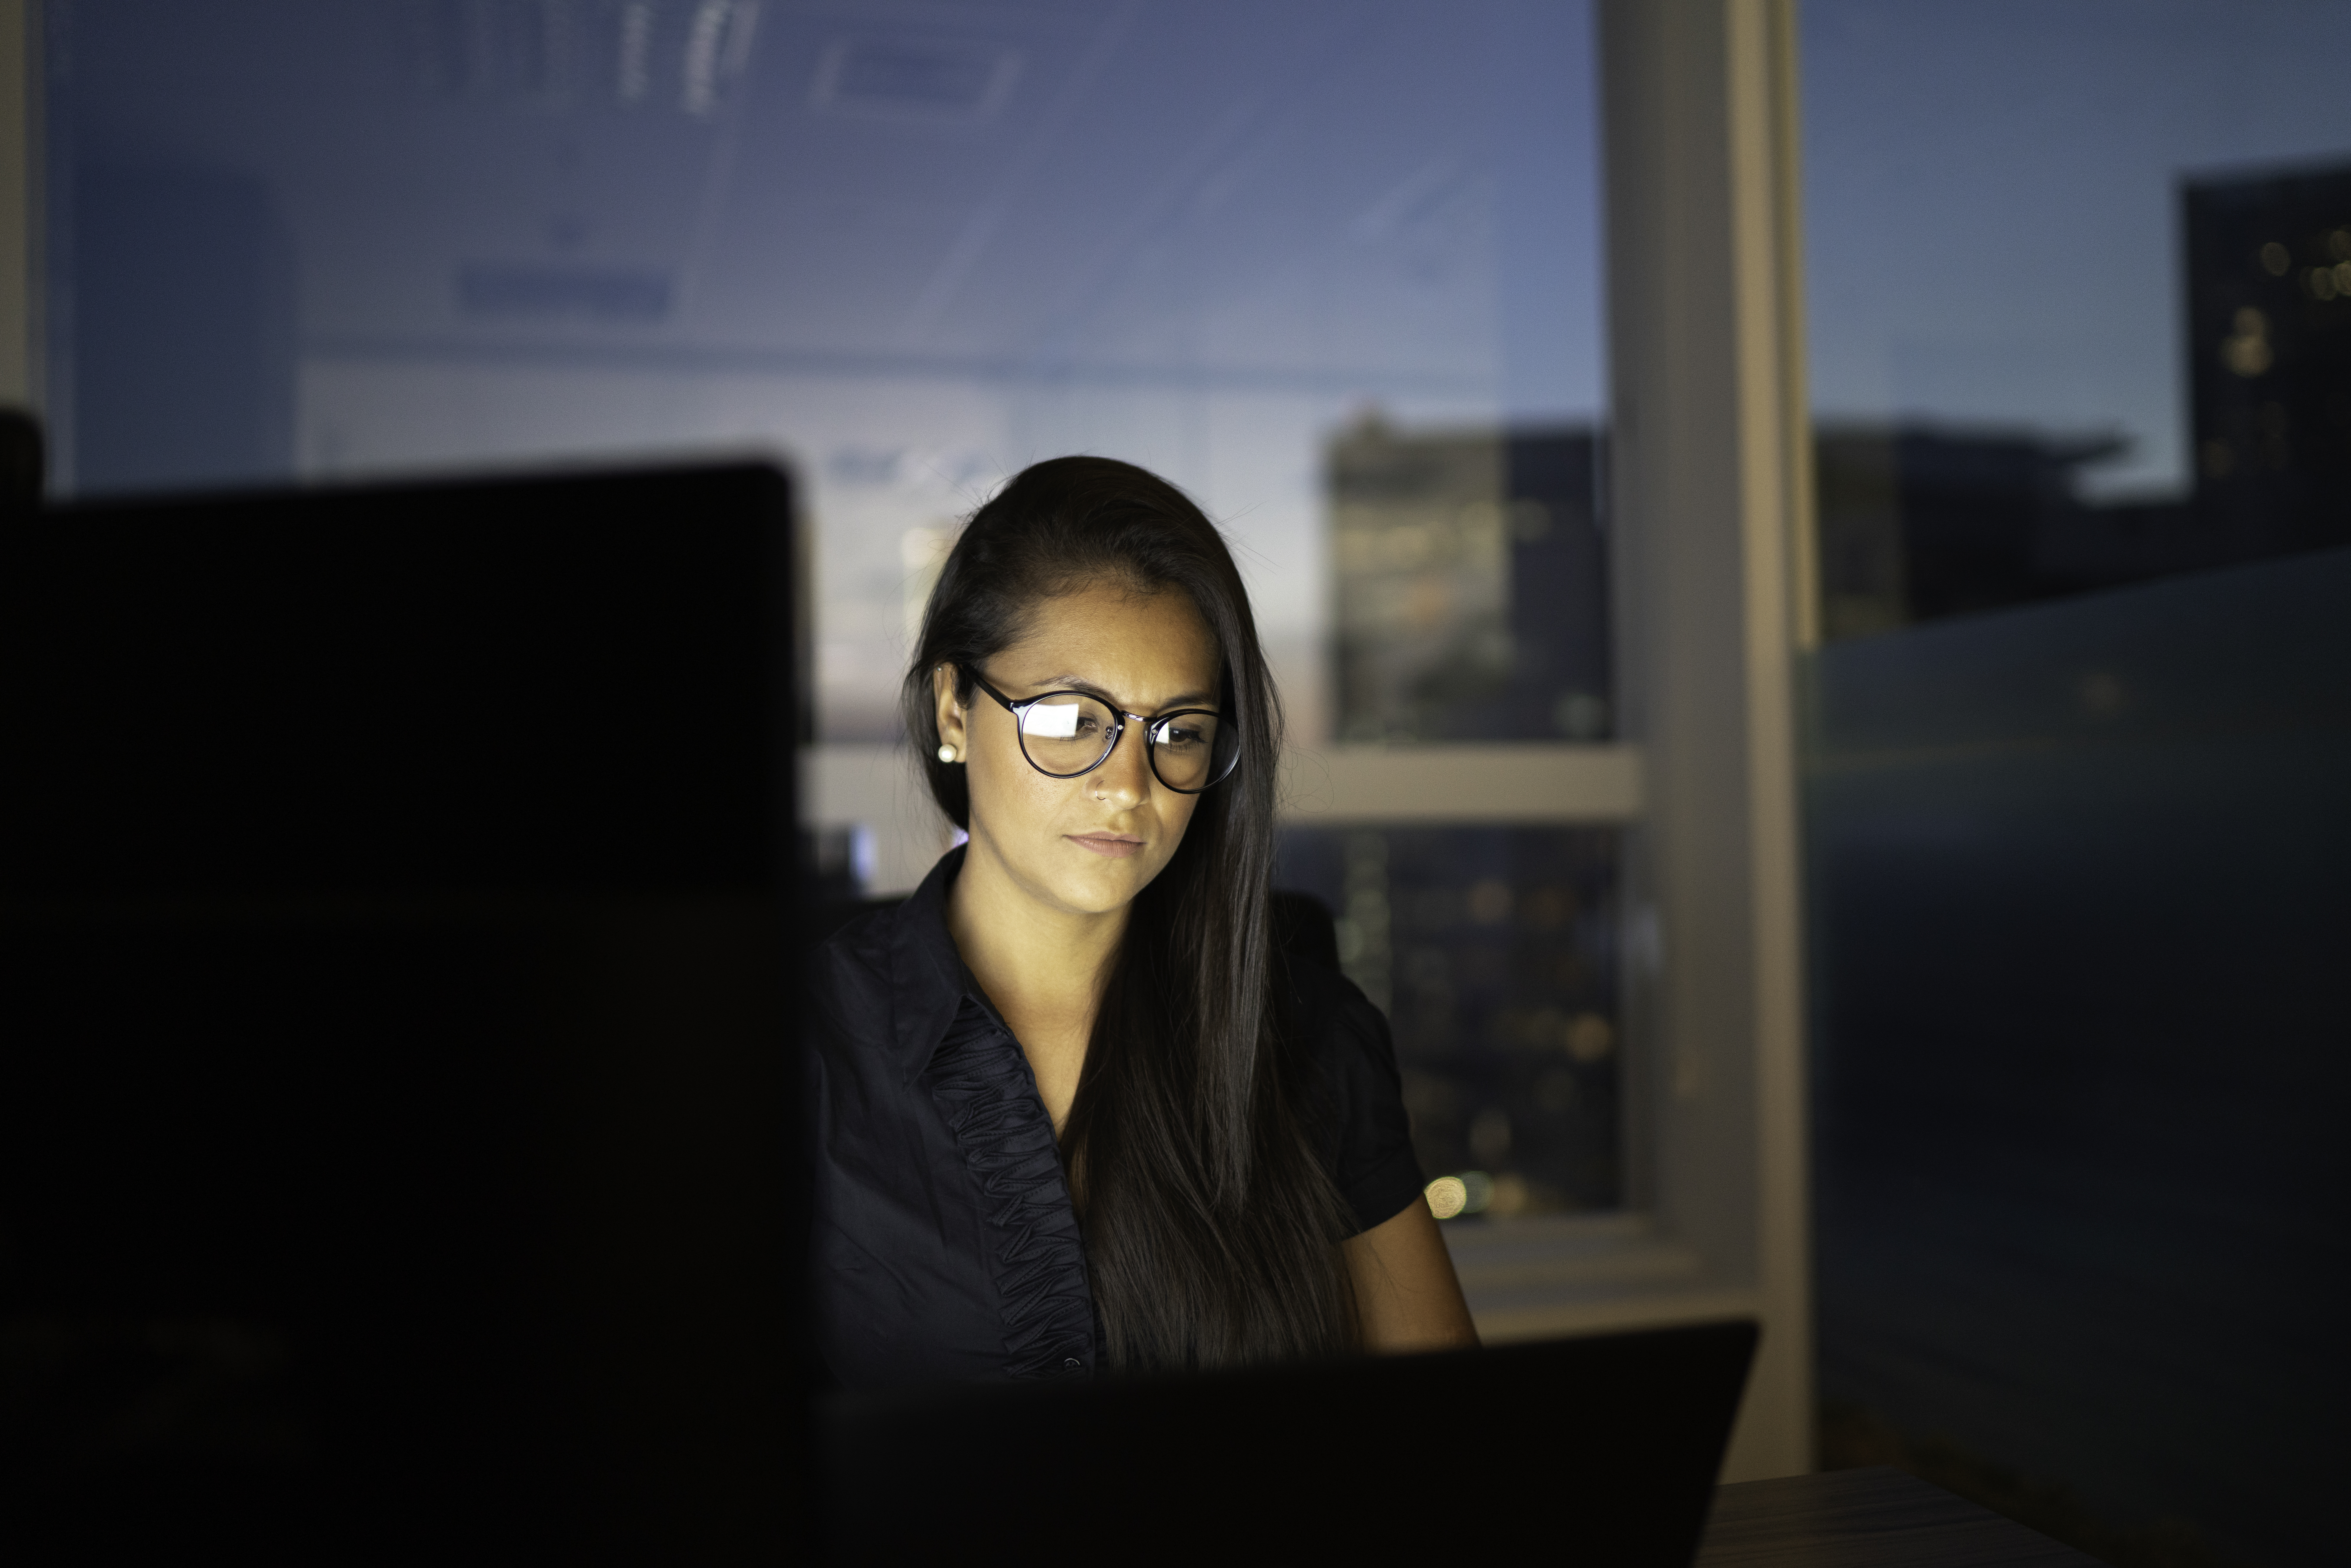 Businesswoman working late in the office | Source: Getty Images